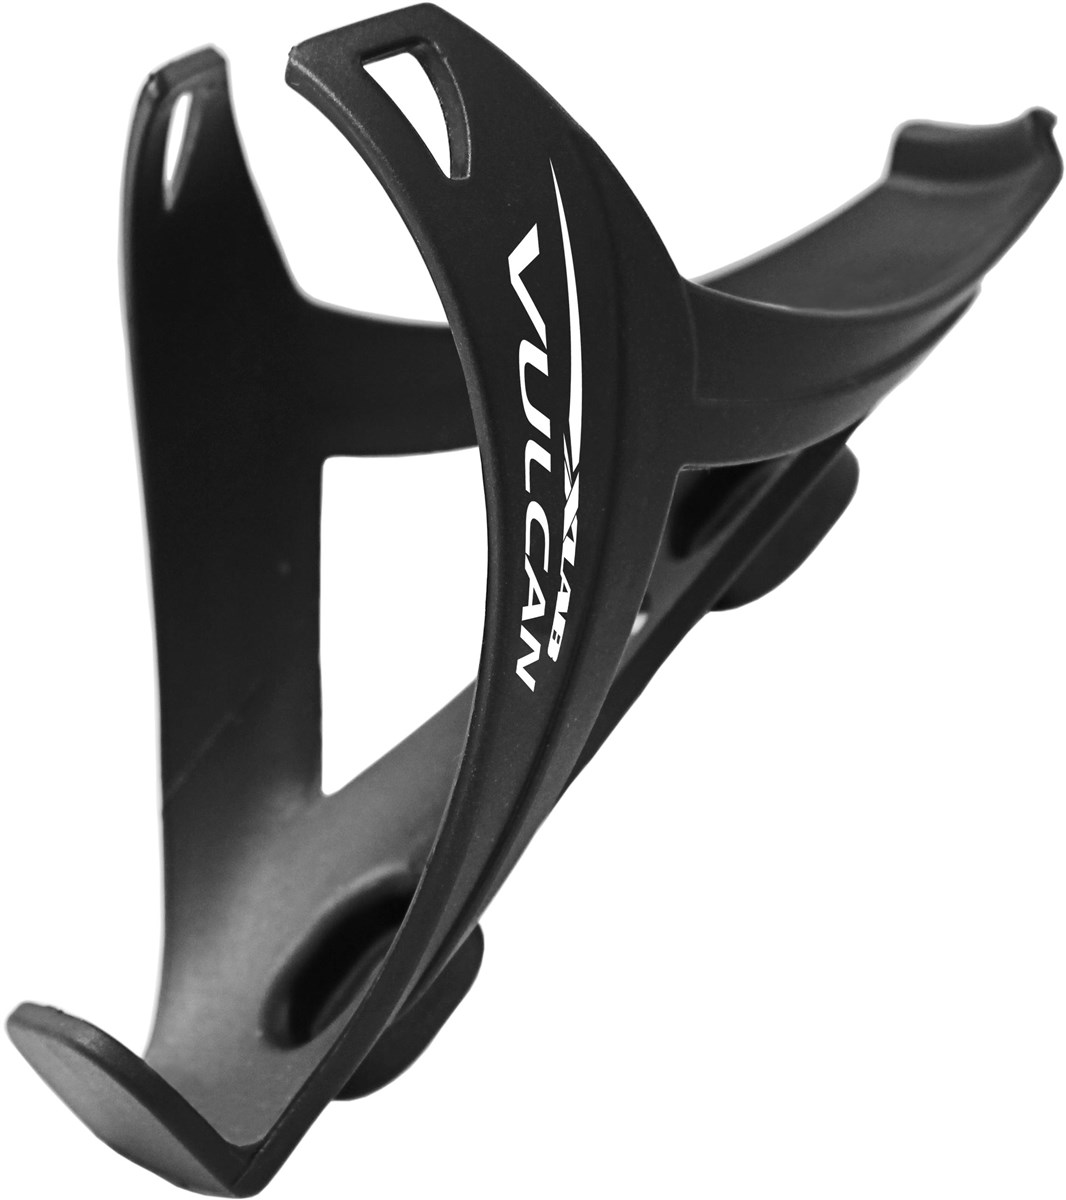 XLAB Vulcan Bottle Cage product image